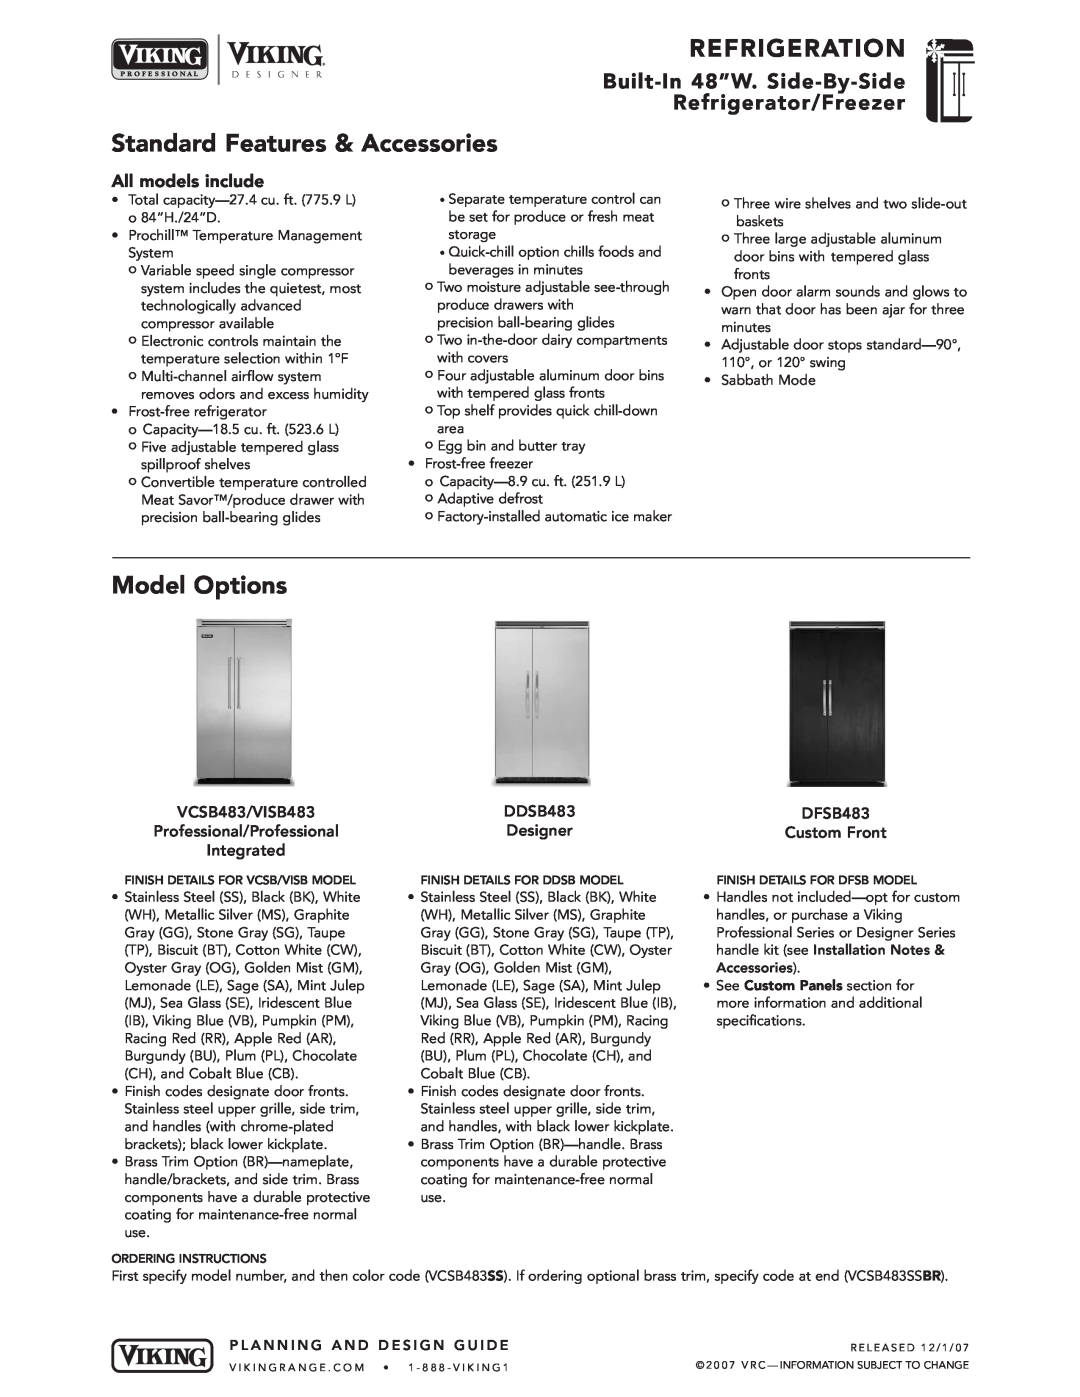 Viking DFSB483 specifications Refrigeration, Standard Features & Accessories, Model Options, All models include, DDSB483 